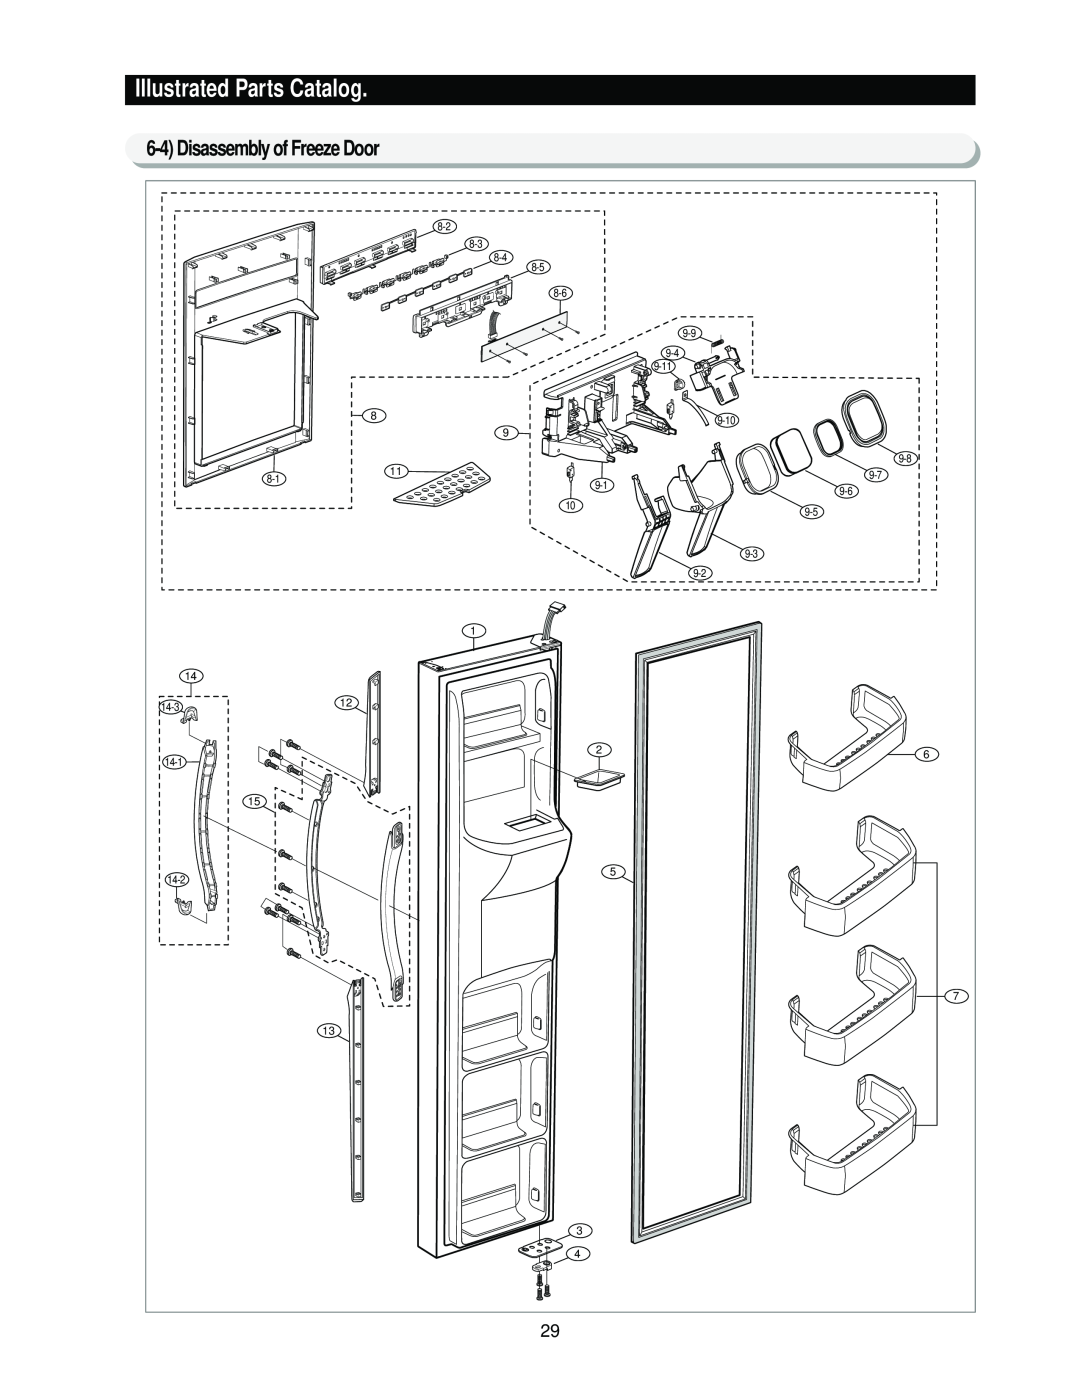 Samsung RS2*3* manual 6-4Disassembly of Freeze Door, Illustrated Parts Catalog 